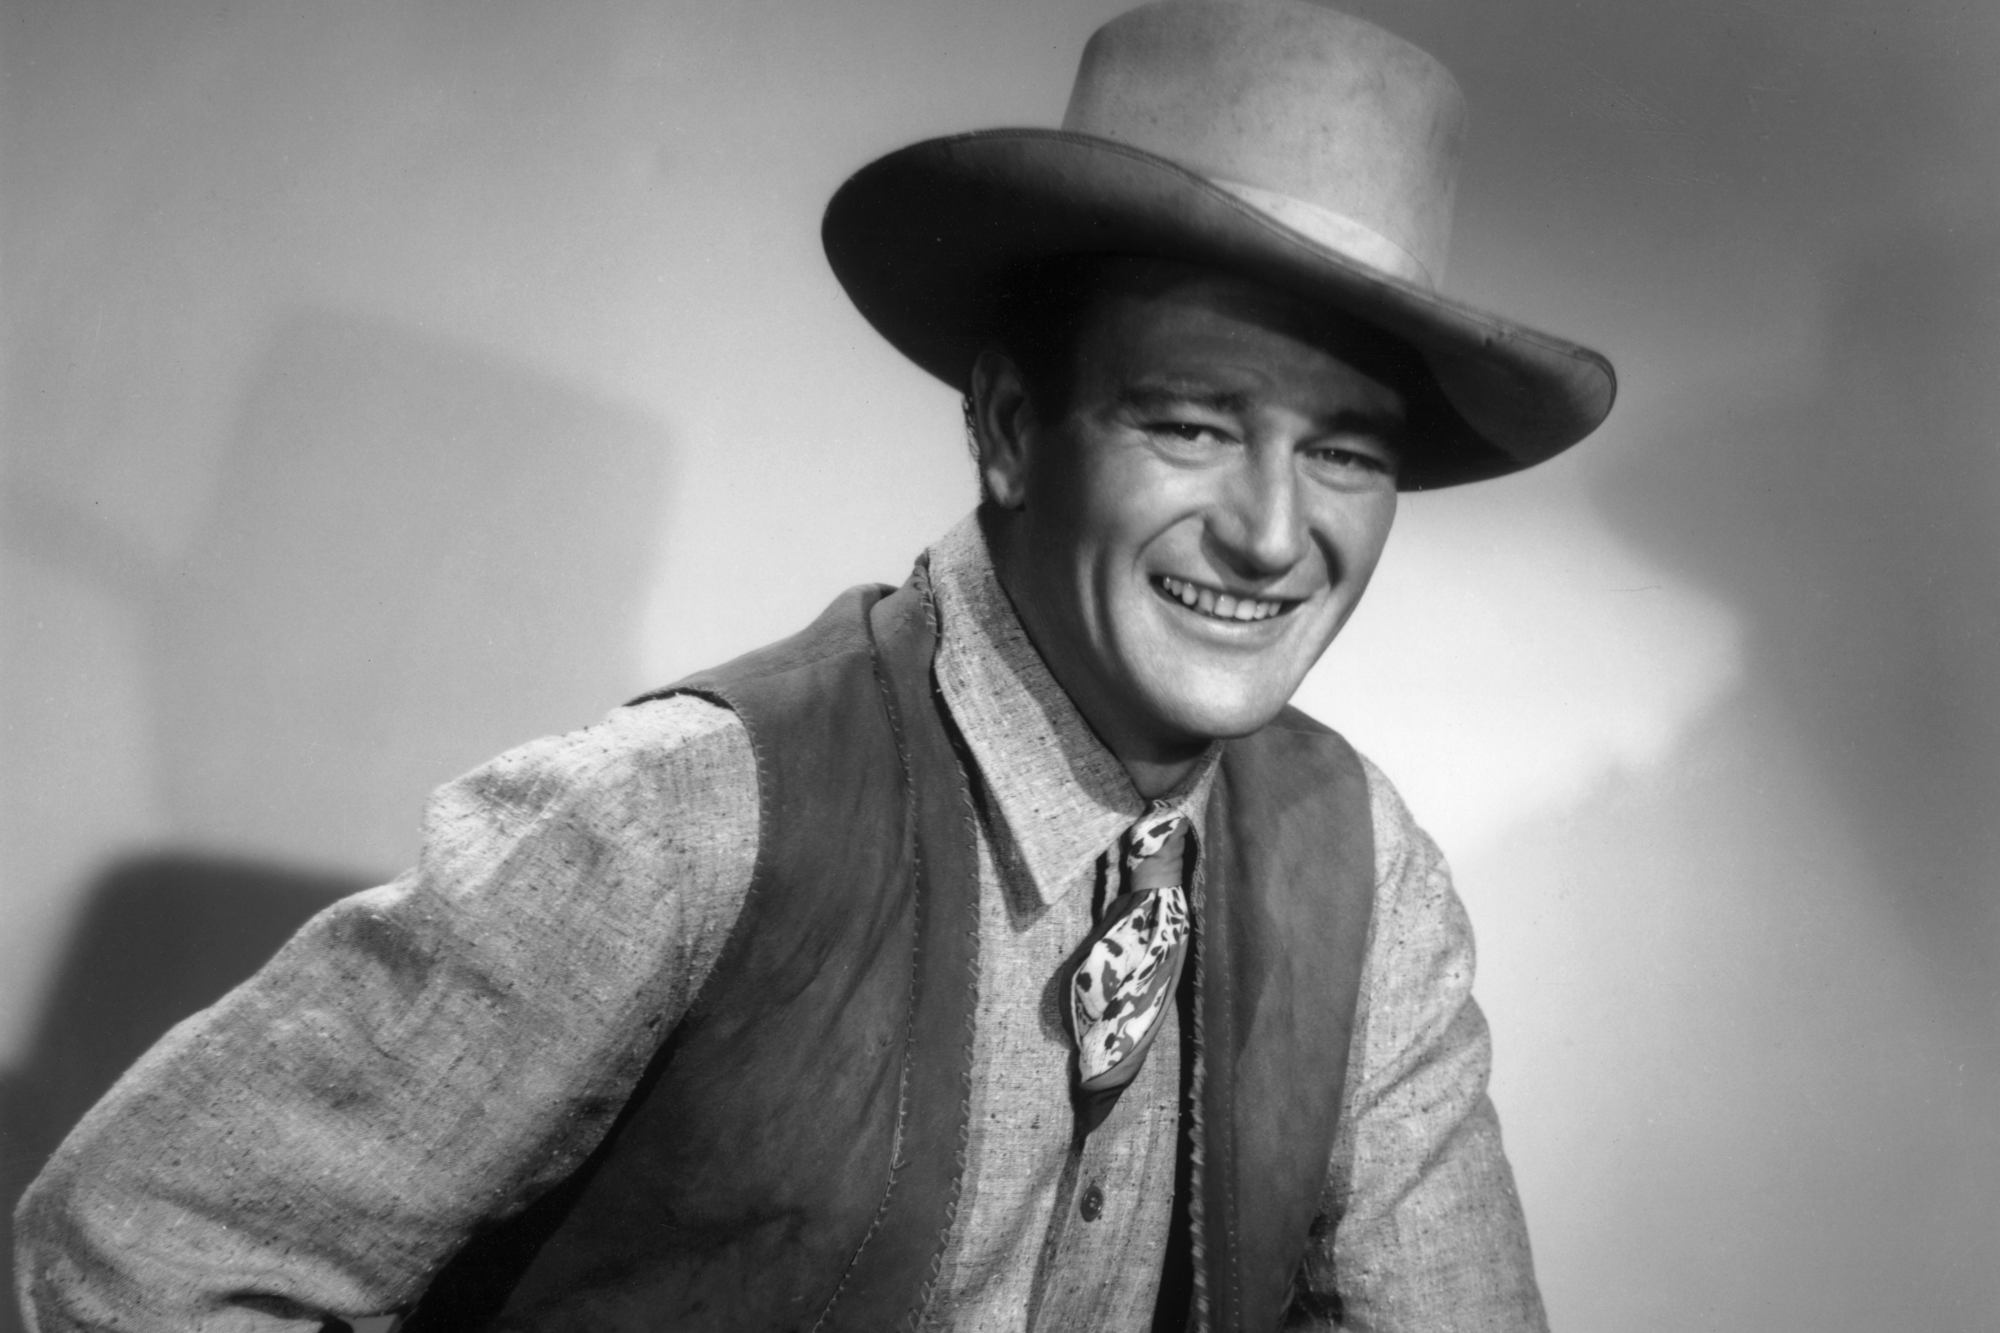 Actor and once stuntman John Wayne smiling in a black-and-white portrait, wearing Western clothing.